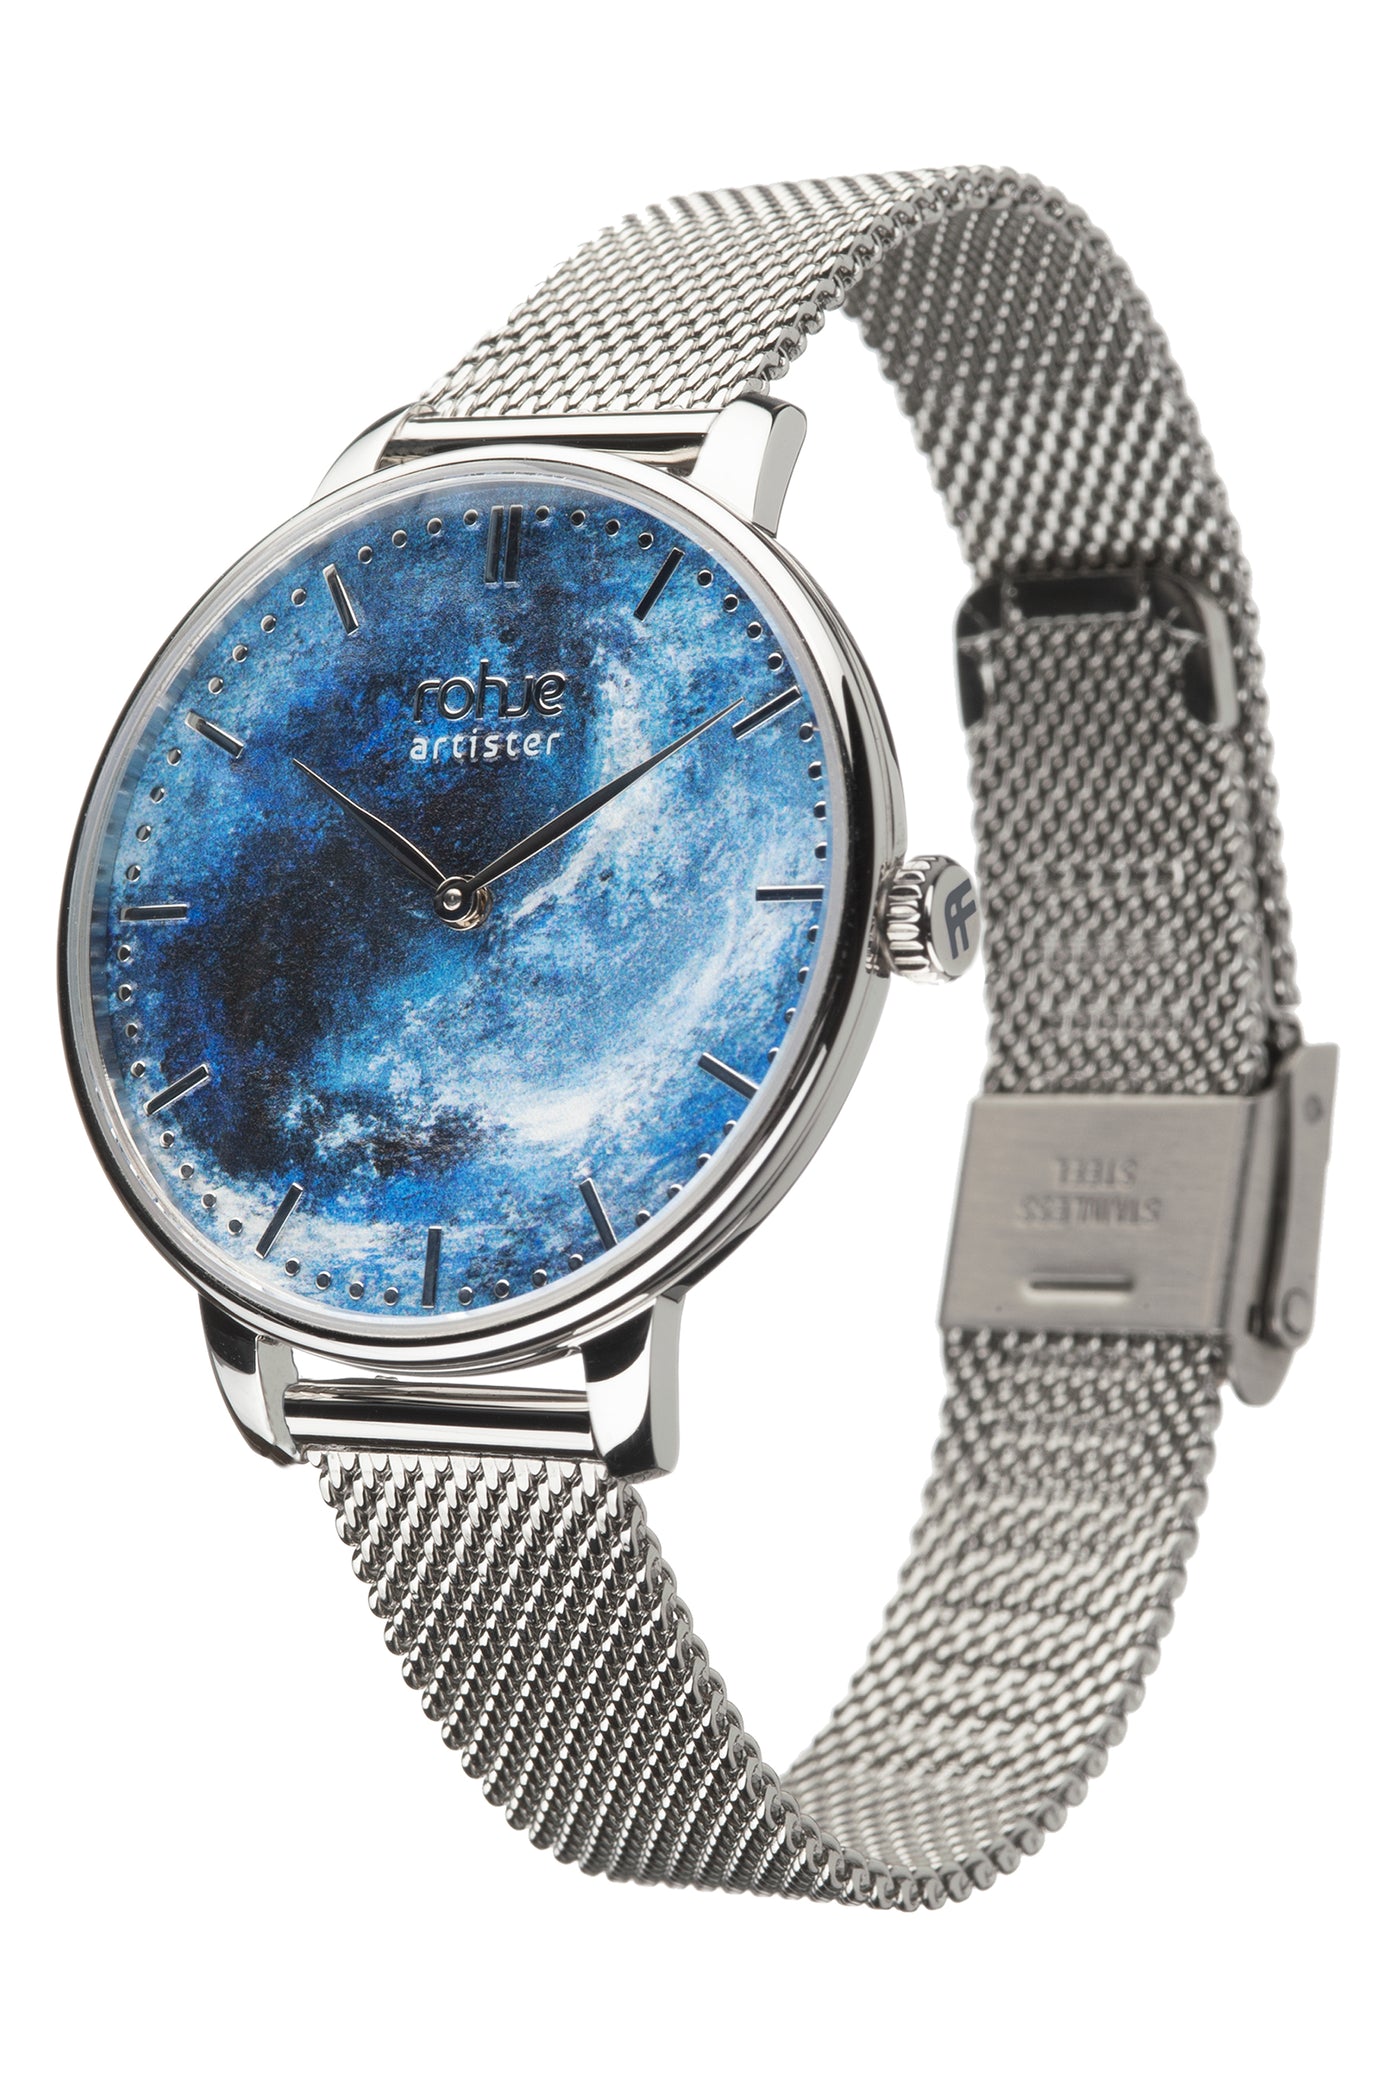 Rohje Artister blue with steel strap- silver watch with deep blue dial side #strap_silver-mesh